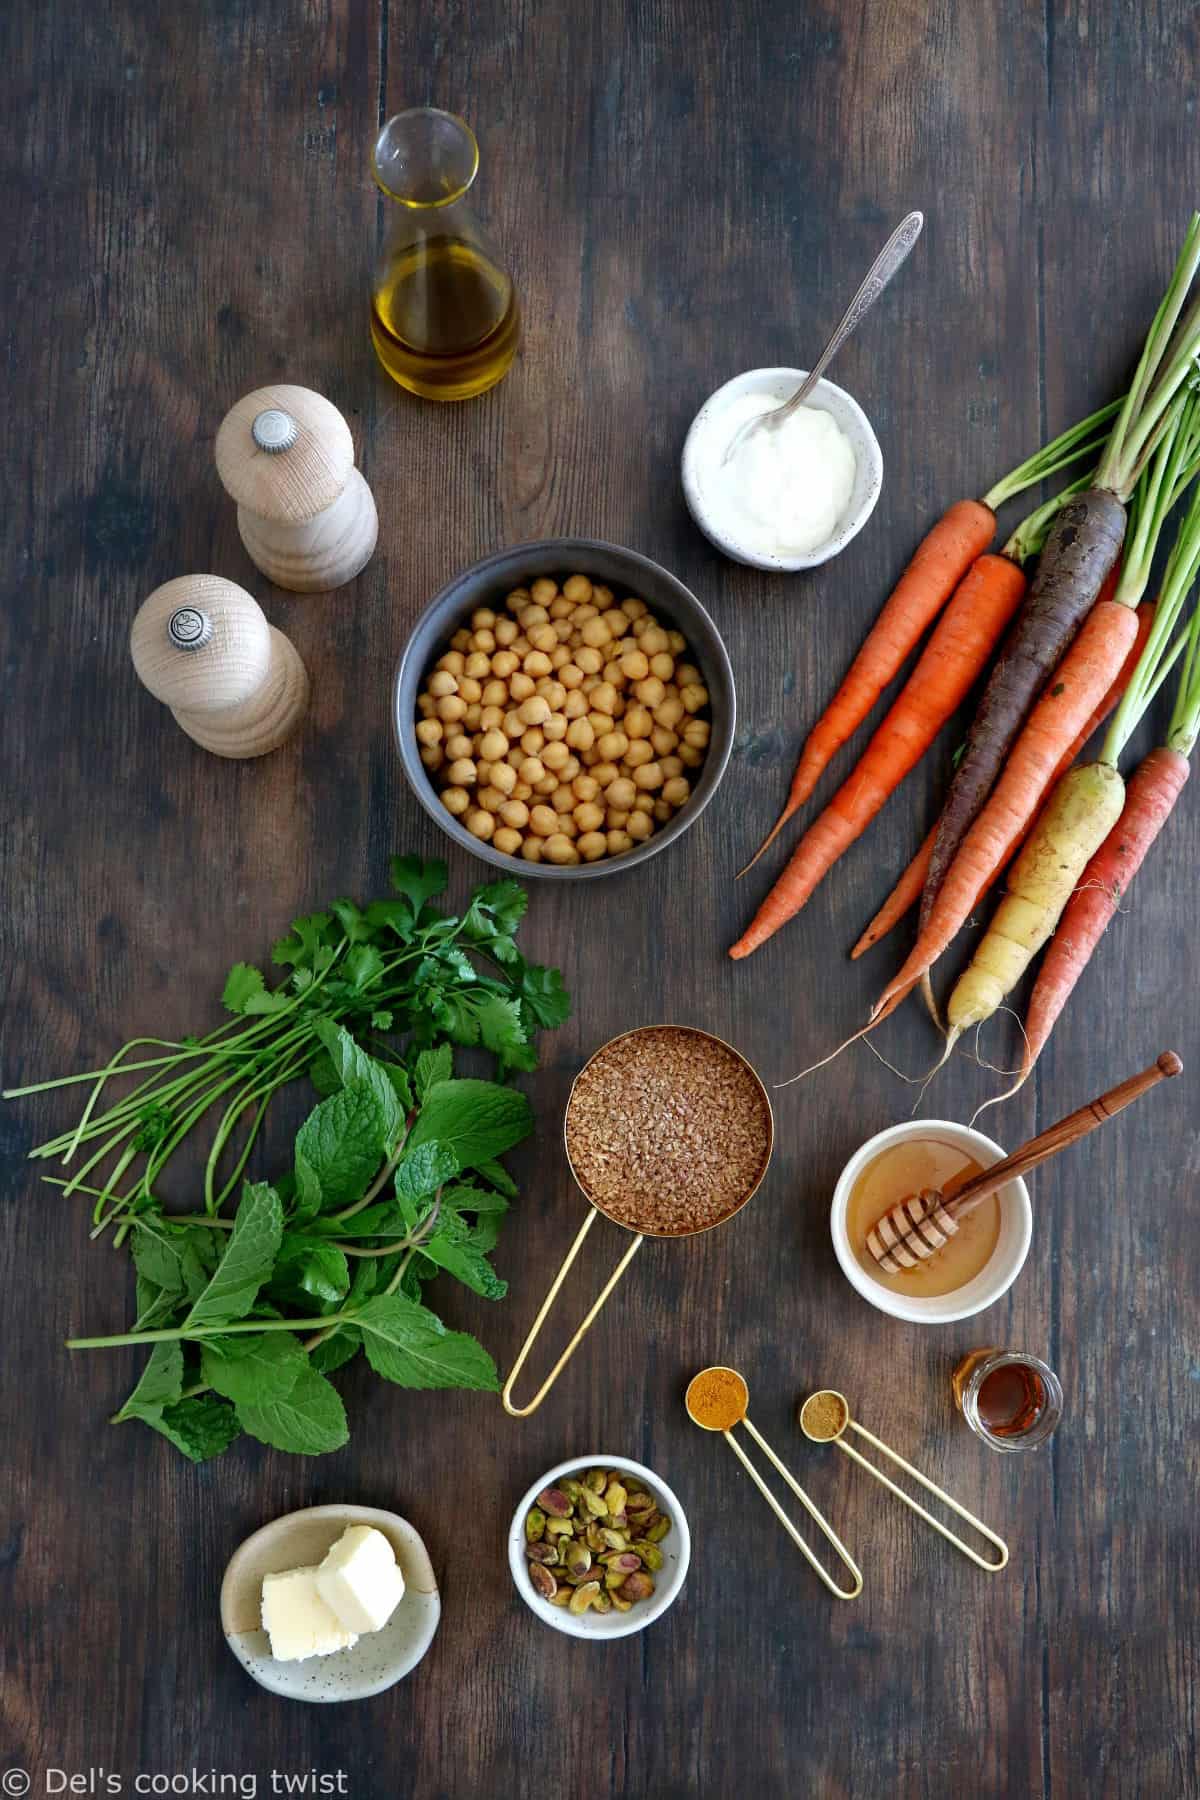 These caramelized carrots and chickpeas with bulgur make an impressive side or vegetarian main for those cozy days out there.